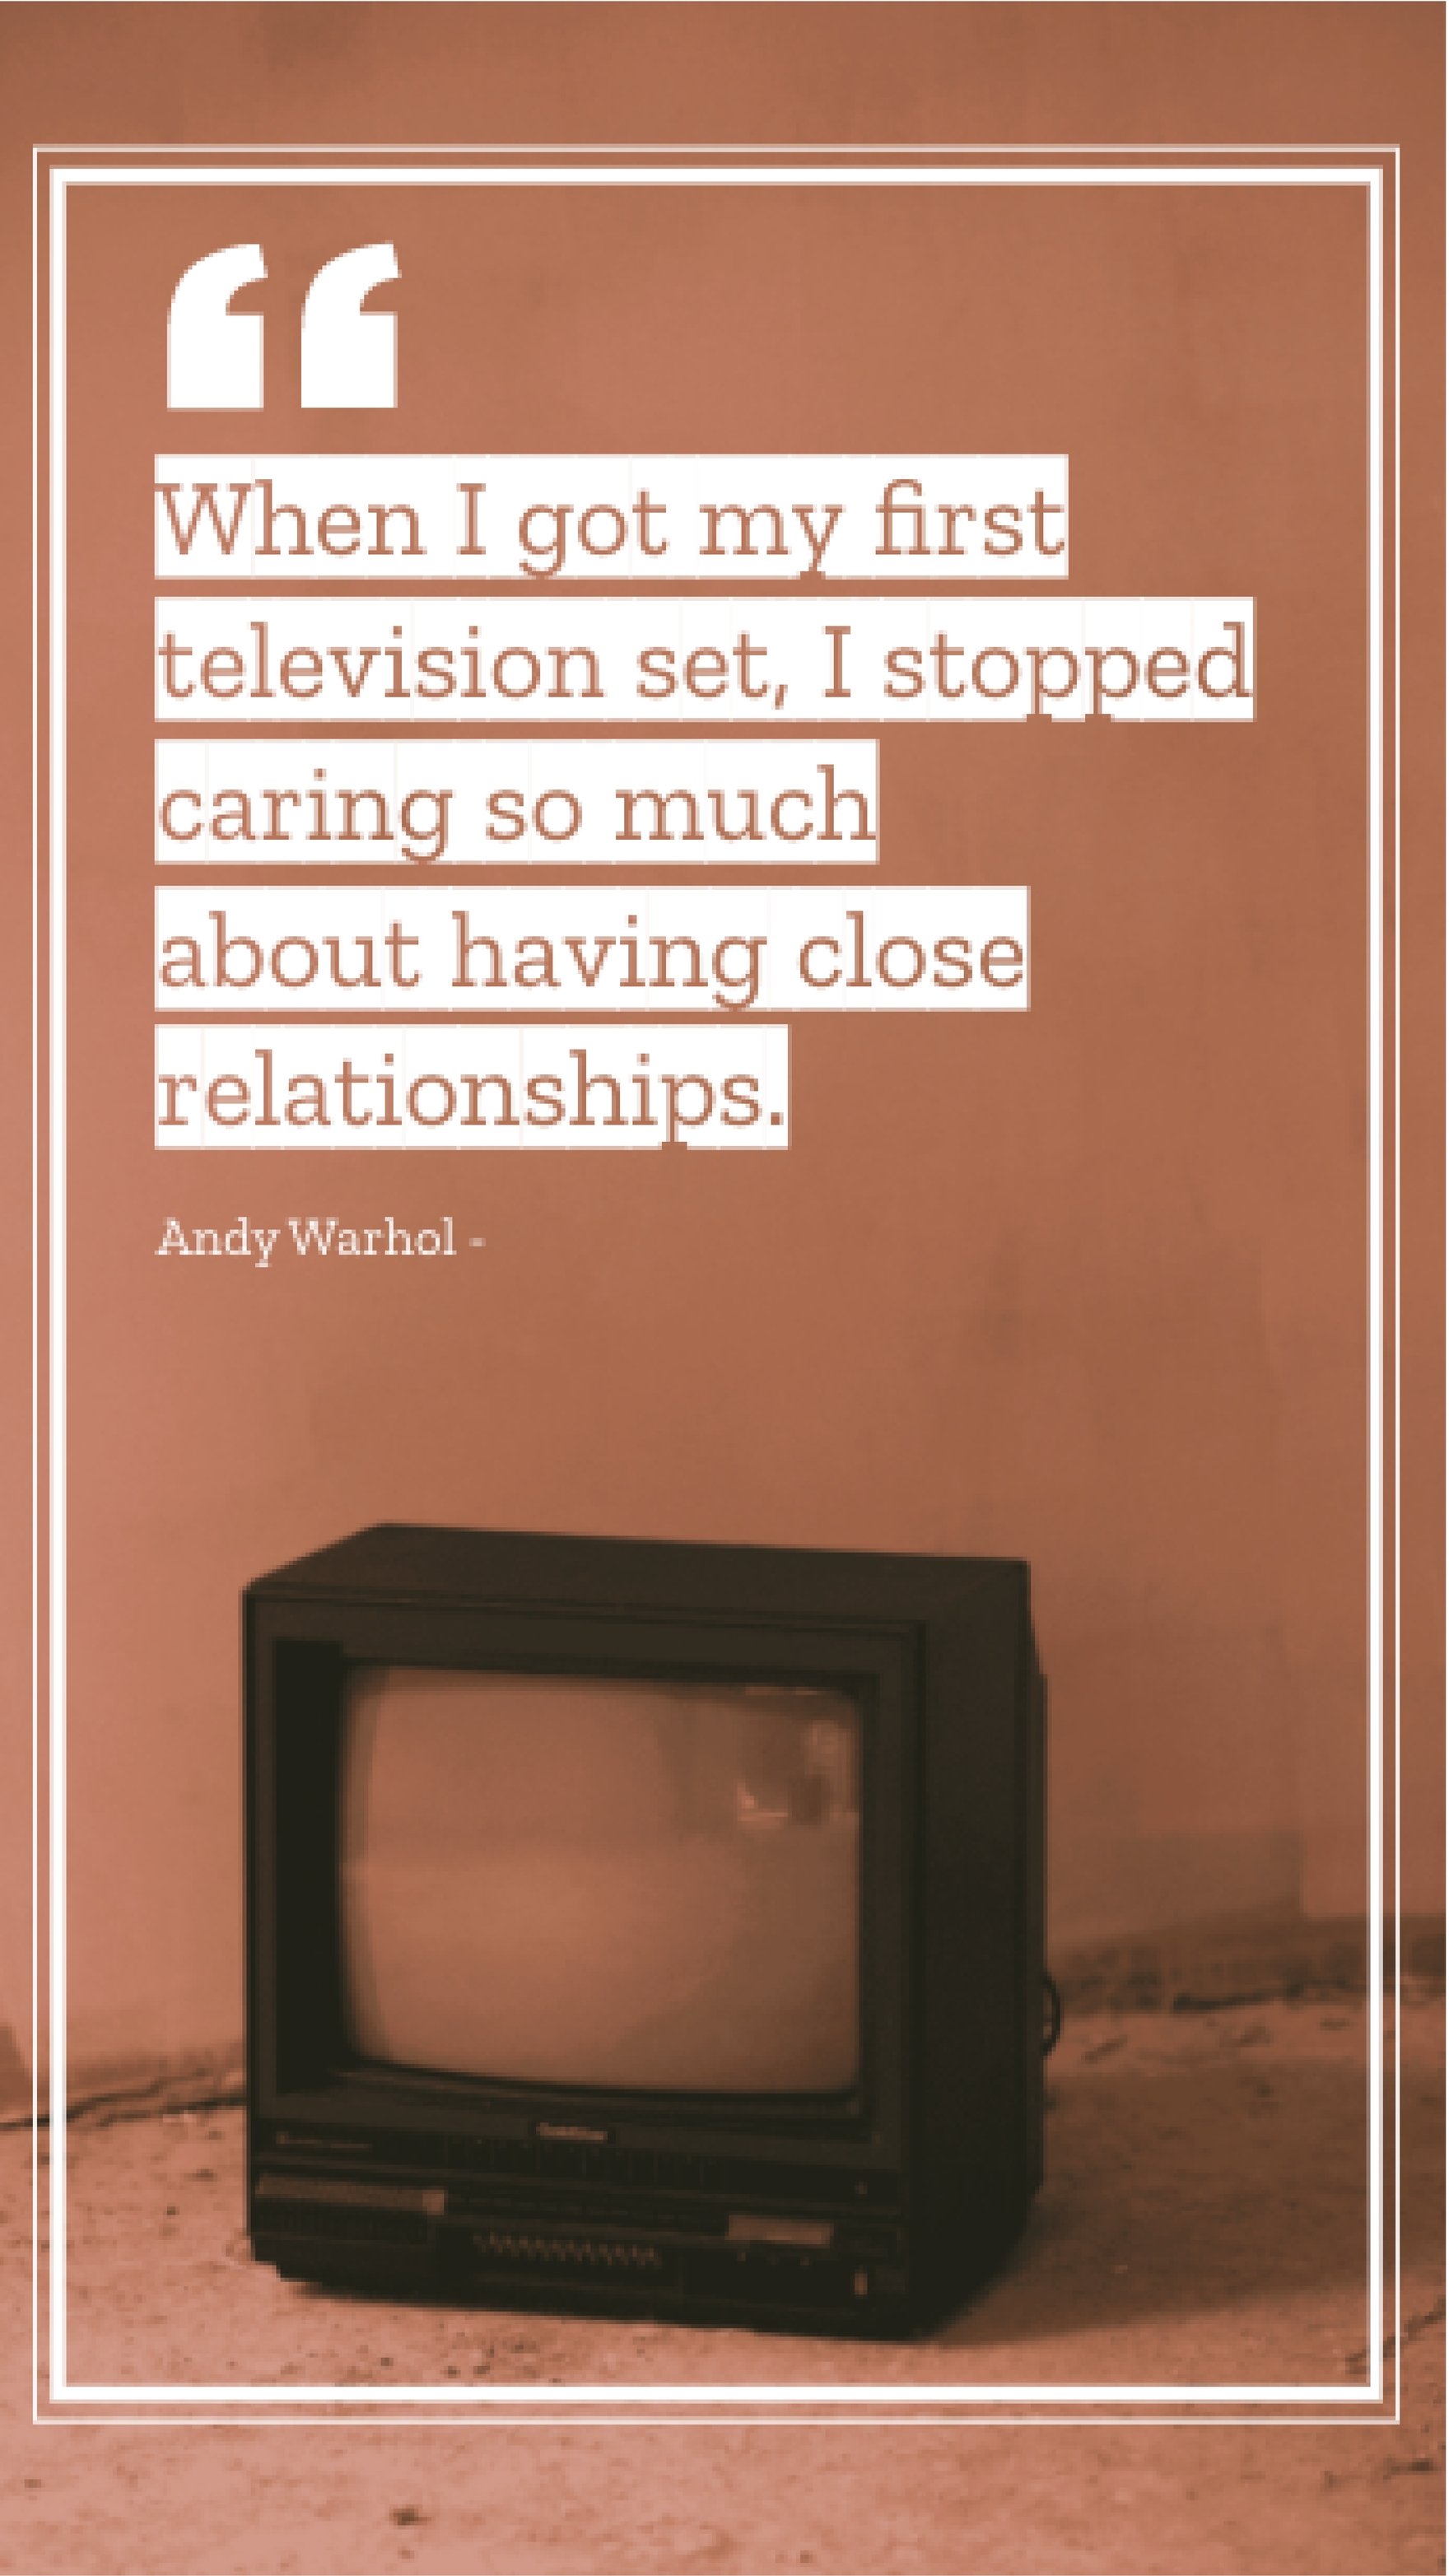 Andy Warhol - When I got my first television set, I stopped caring so much about having close relationships. Template